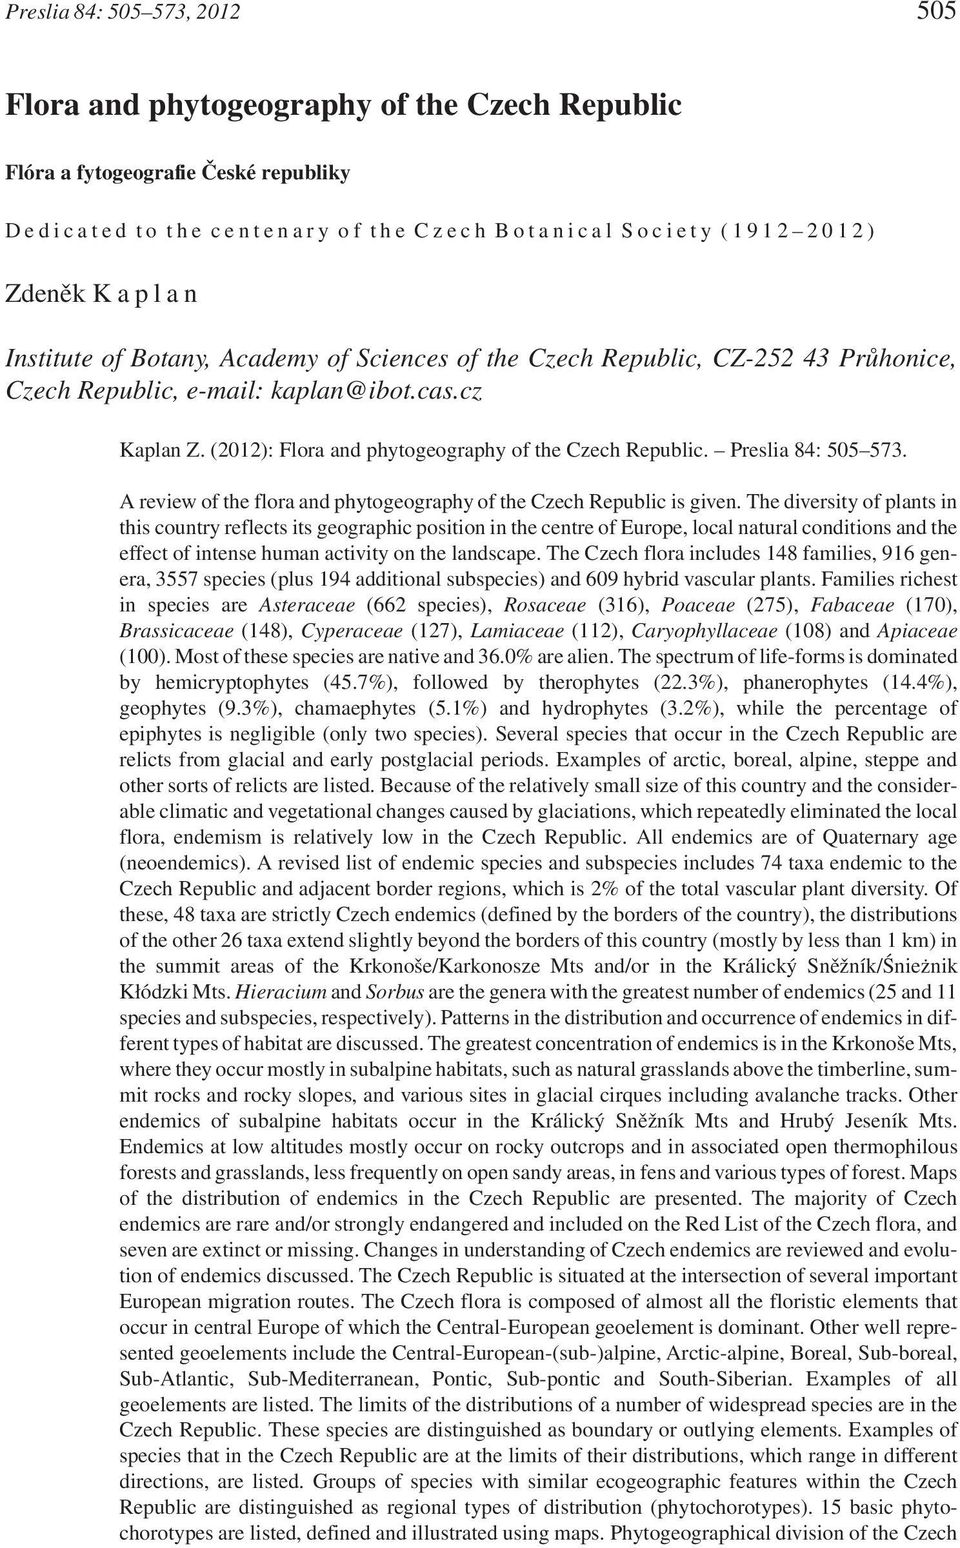 Preslia 84: 505 573. A review of the flora and phytogeography of the Czech Republic is given.